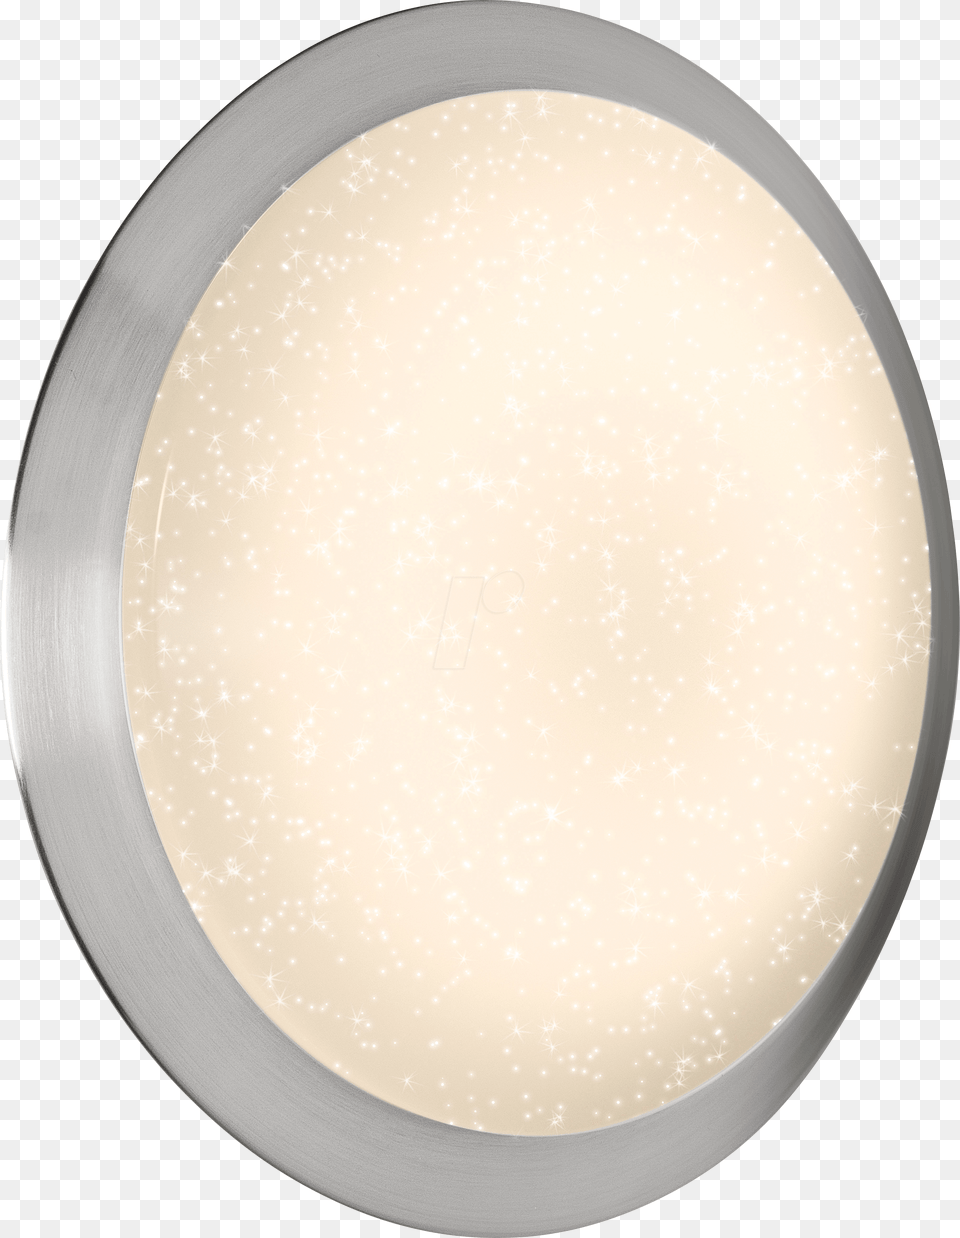 Ceiling Light Silara Tray Sparkle 24 W 1350 Lm Circle, Plate, Food, Meal, Dish Free Png Download